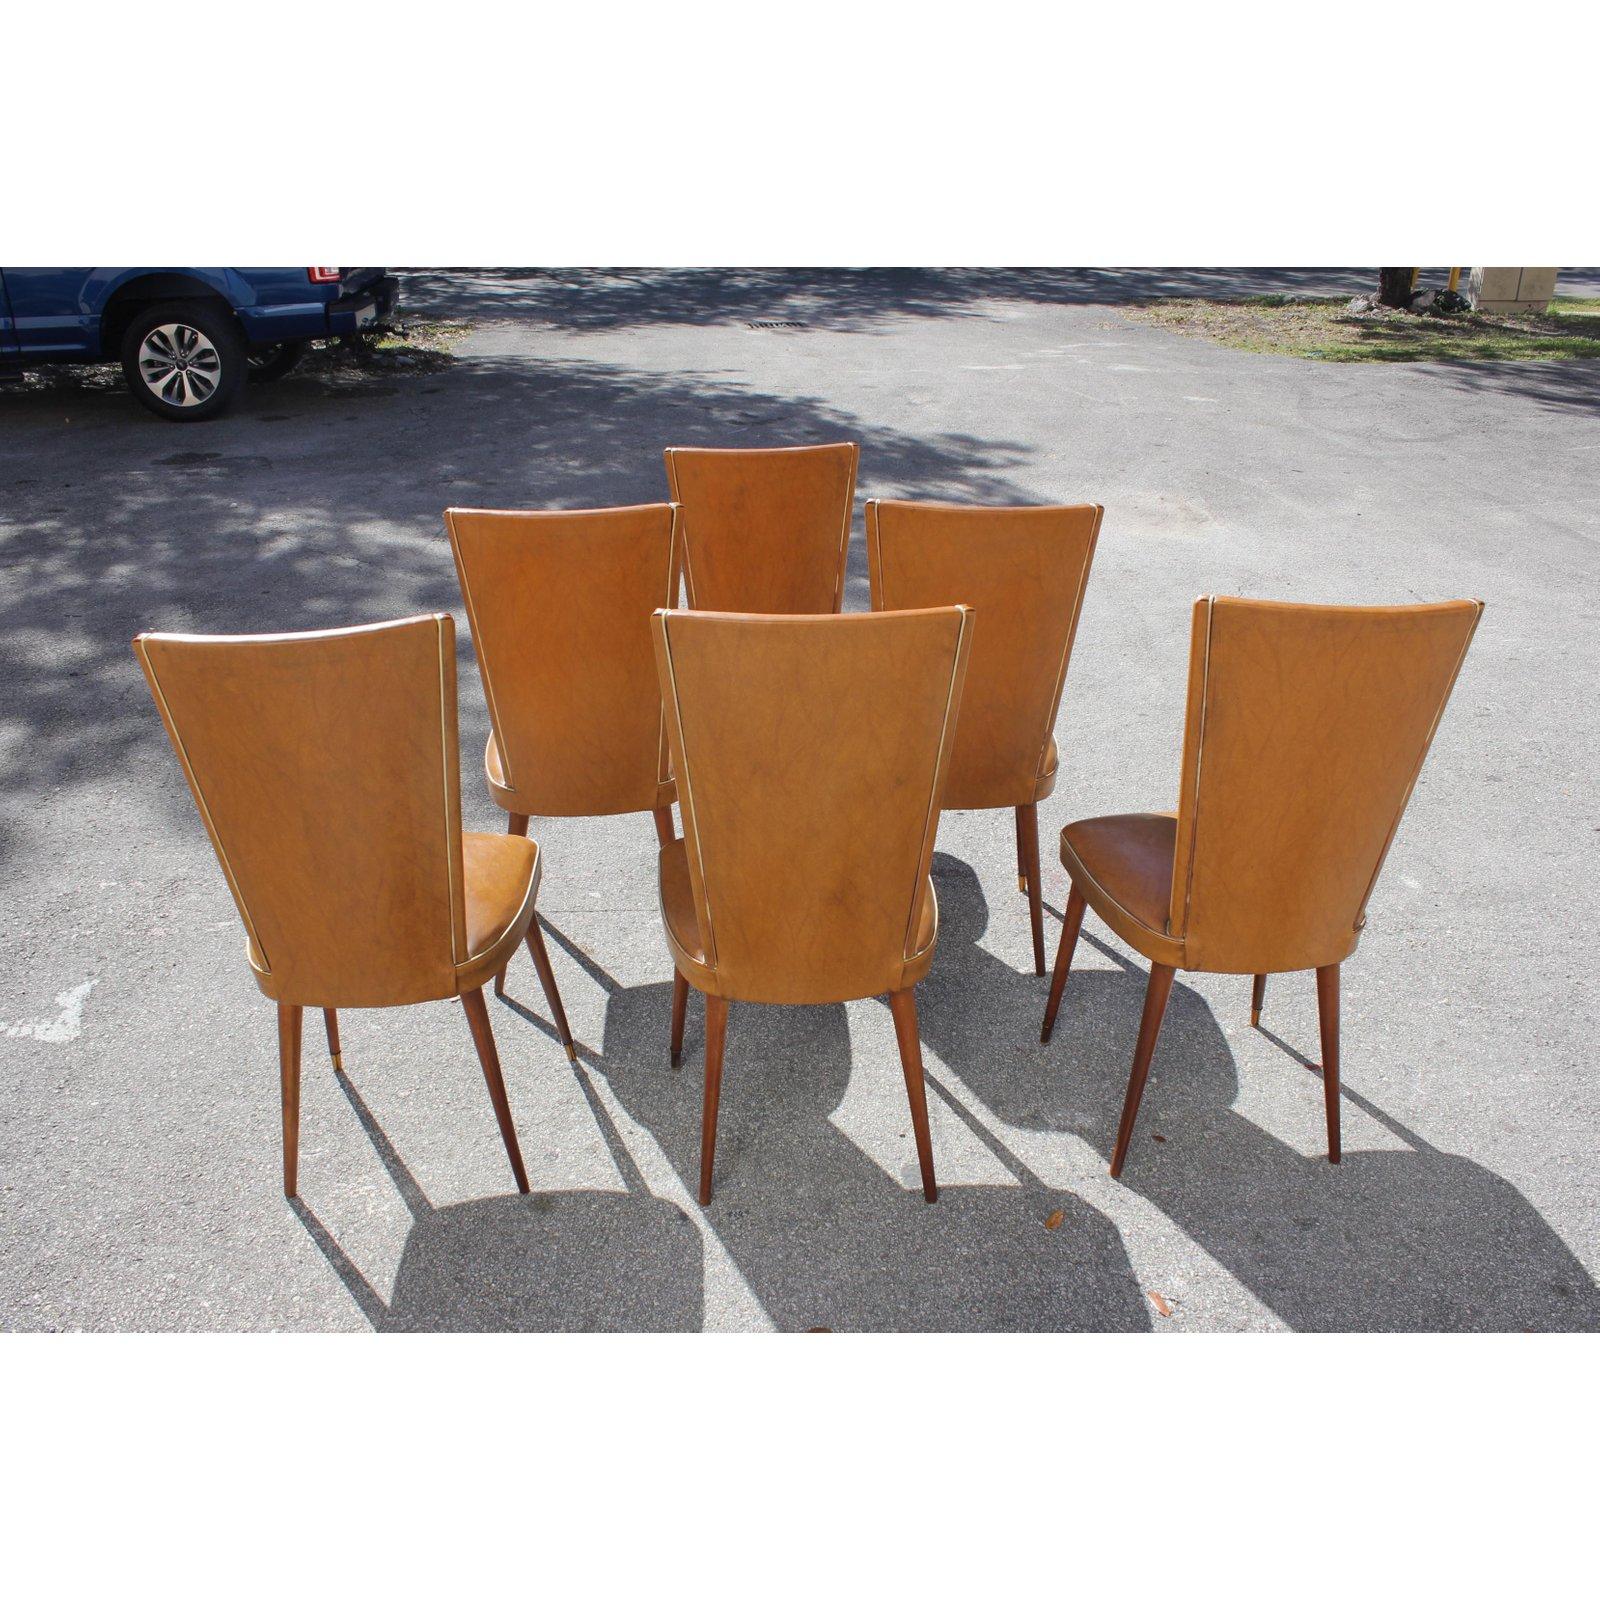 Mid-20th Century Set of 6 Mid-Century Modern Solid Mahogany Dining Chairs, 1960s